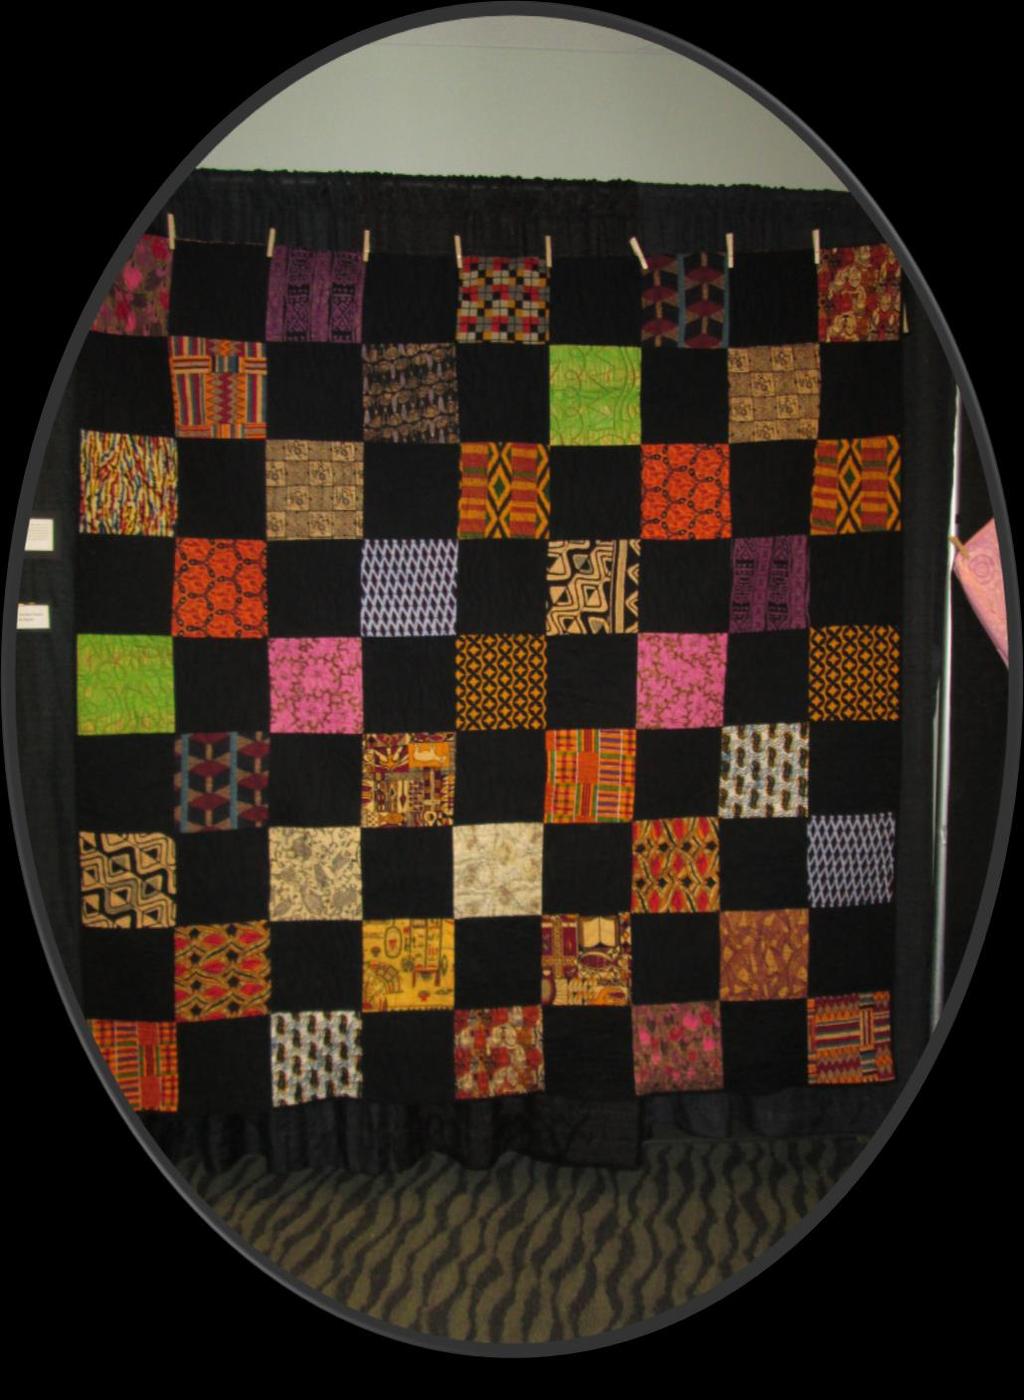 Quilt by Carol Logan Patitu This quilt is made of various African patterns. I made the quilt while living in Texas in the 1990s.